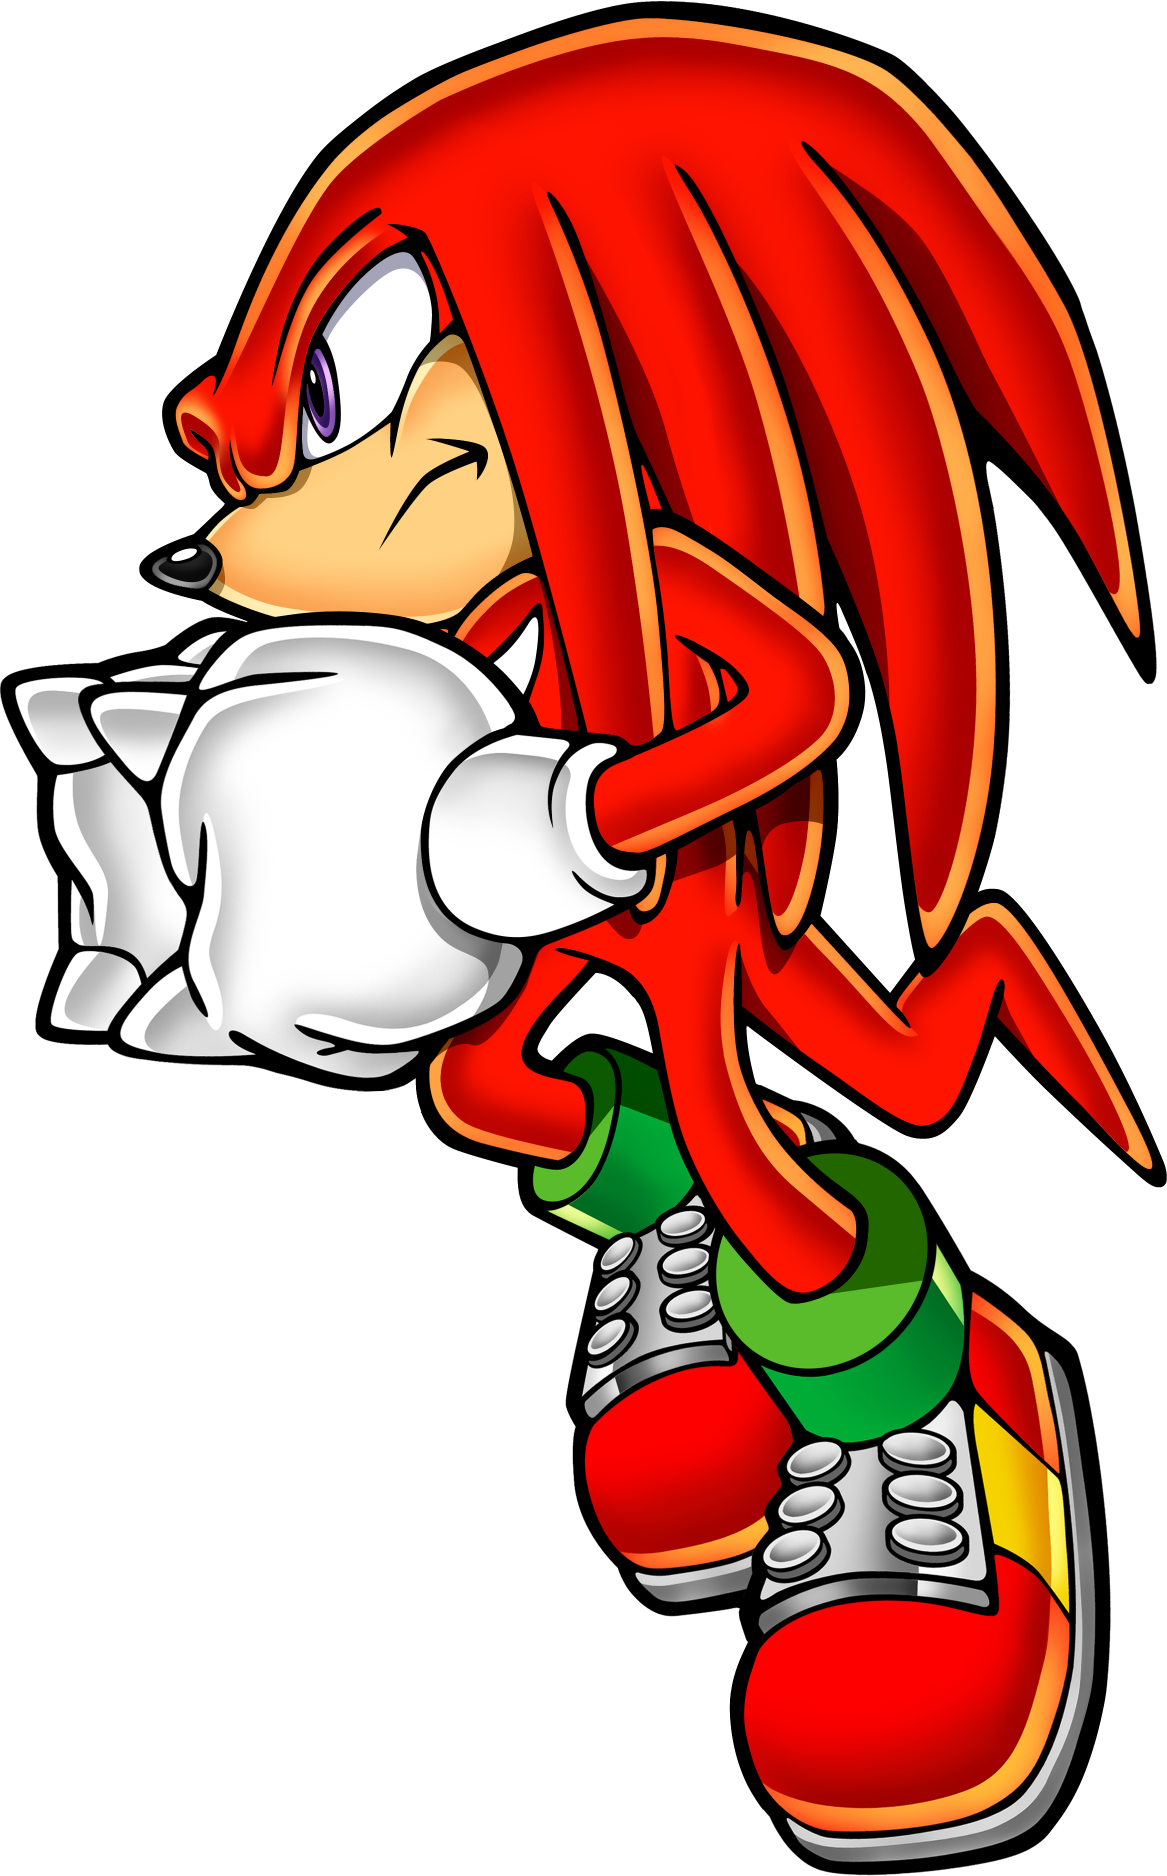 Knuckles the echidna fatal. Finger clipart knuckle